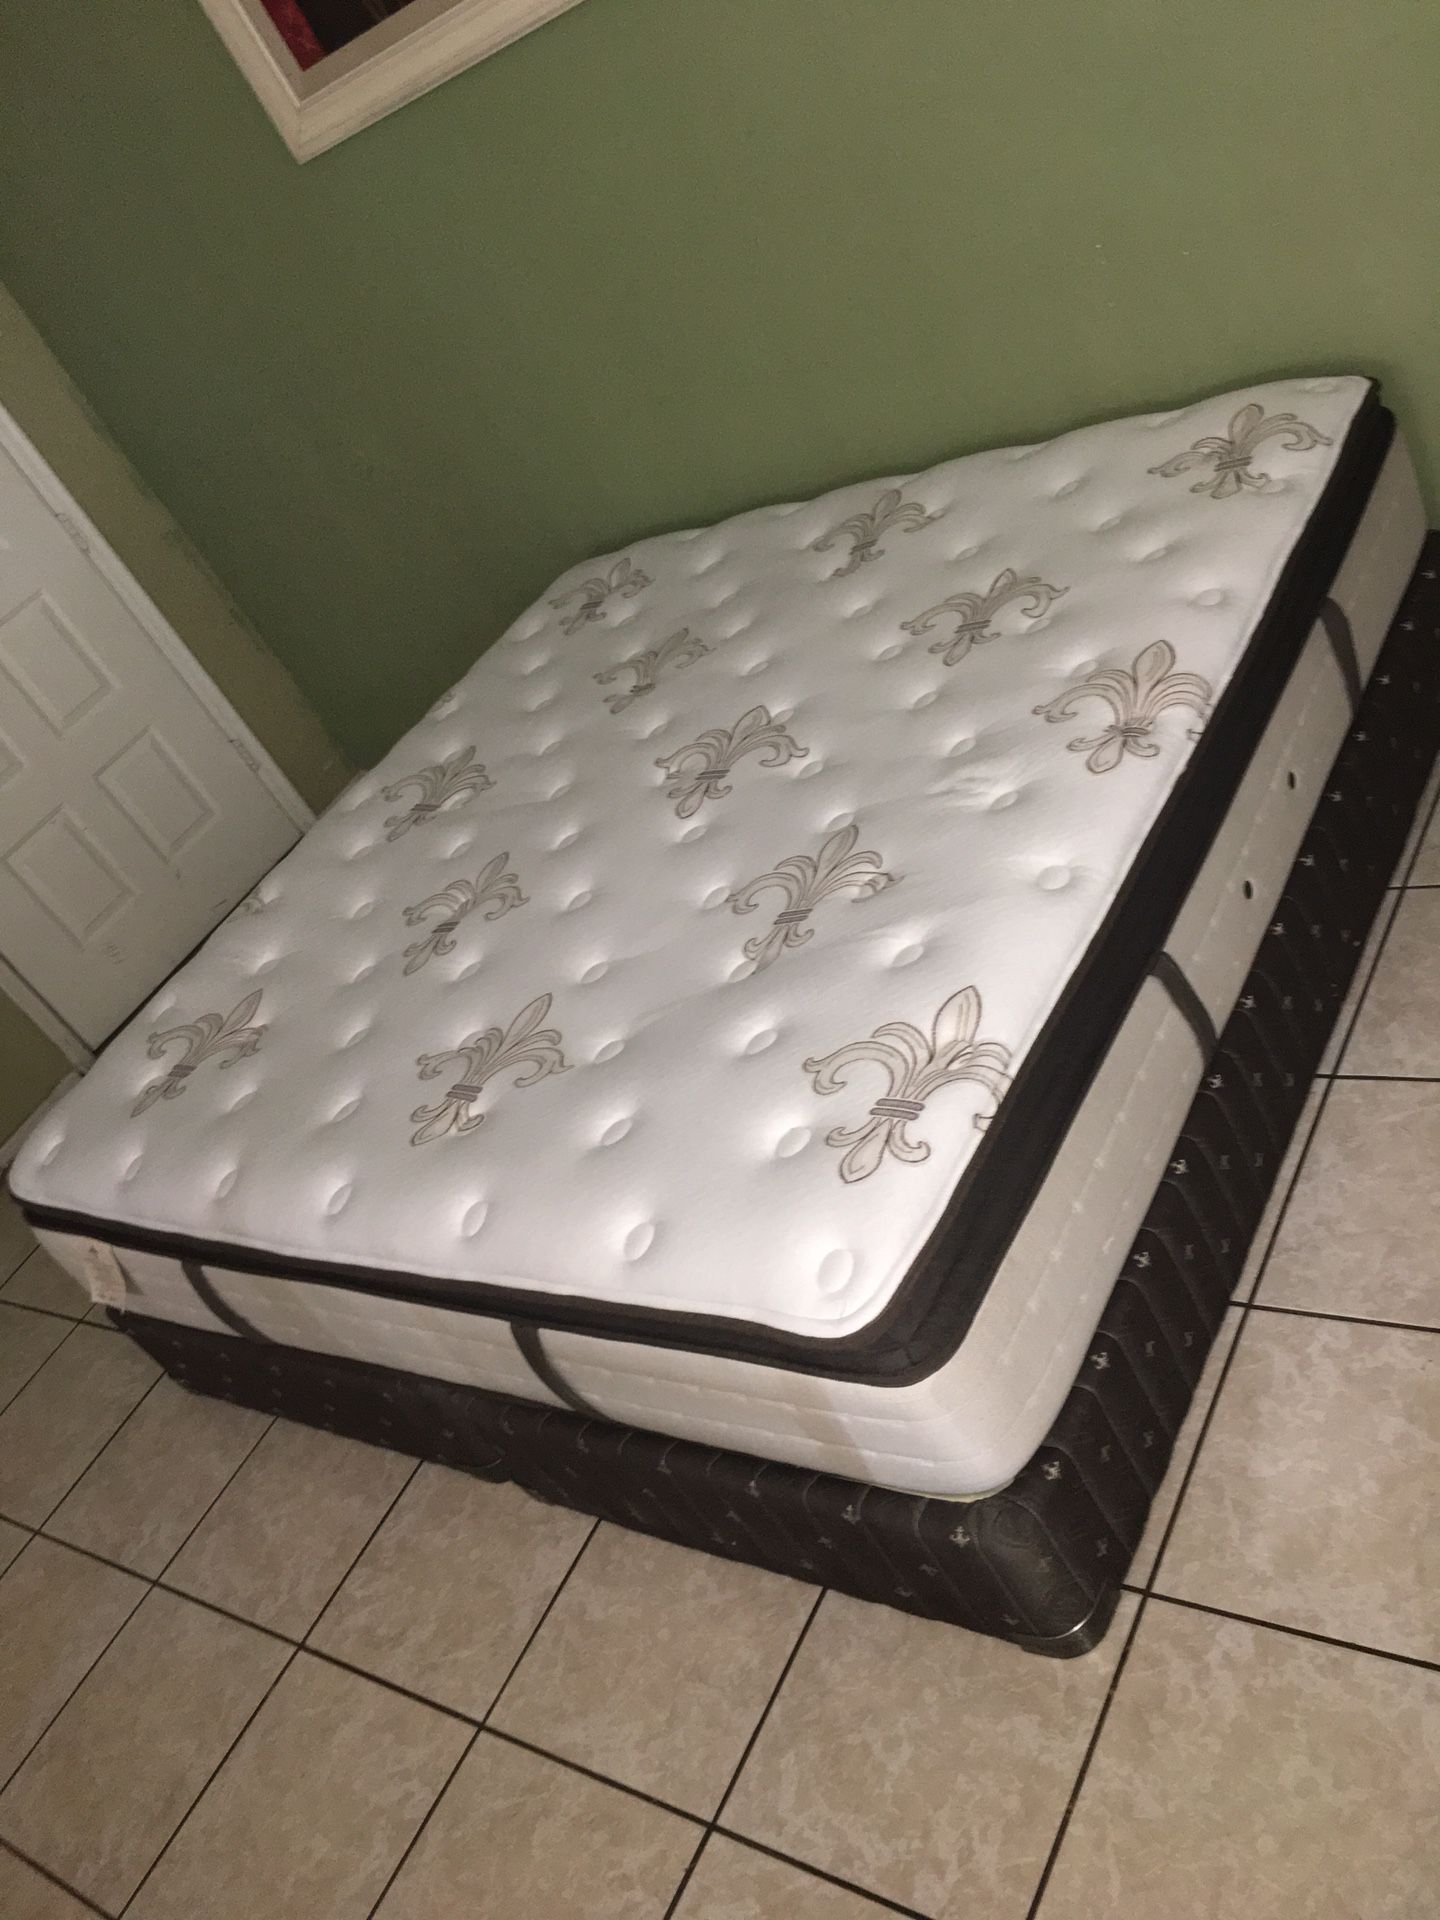 VERY NICE KING MATTRESS AND BOX SPRINGS STEARNS & FOSTER LUXURY PLUSH PILLOWTOP